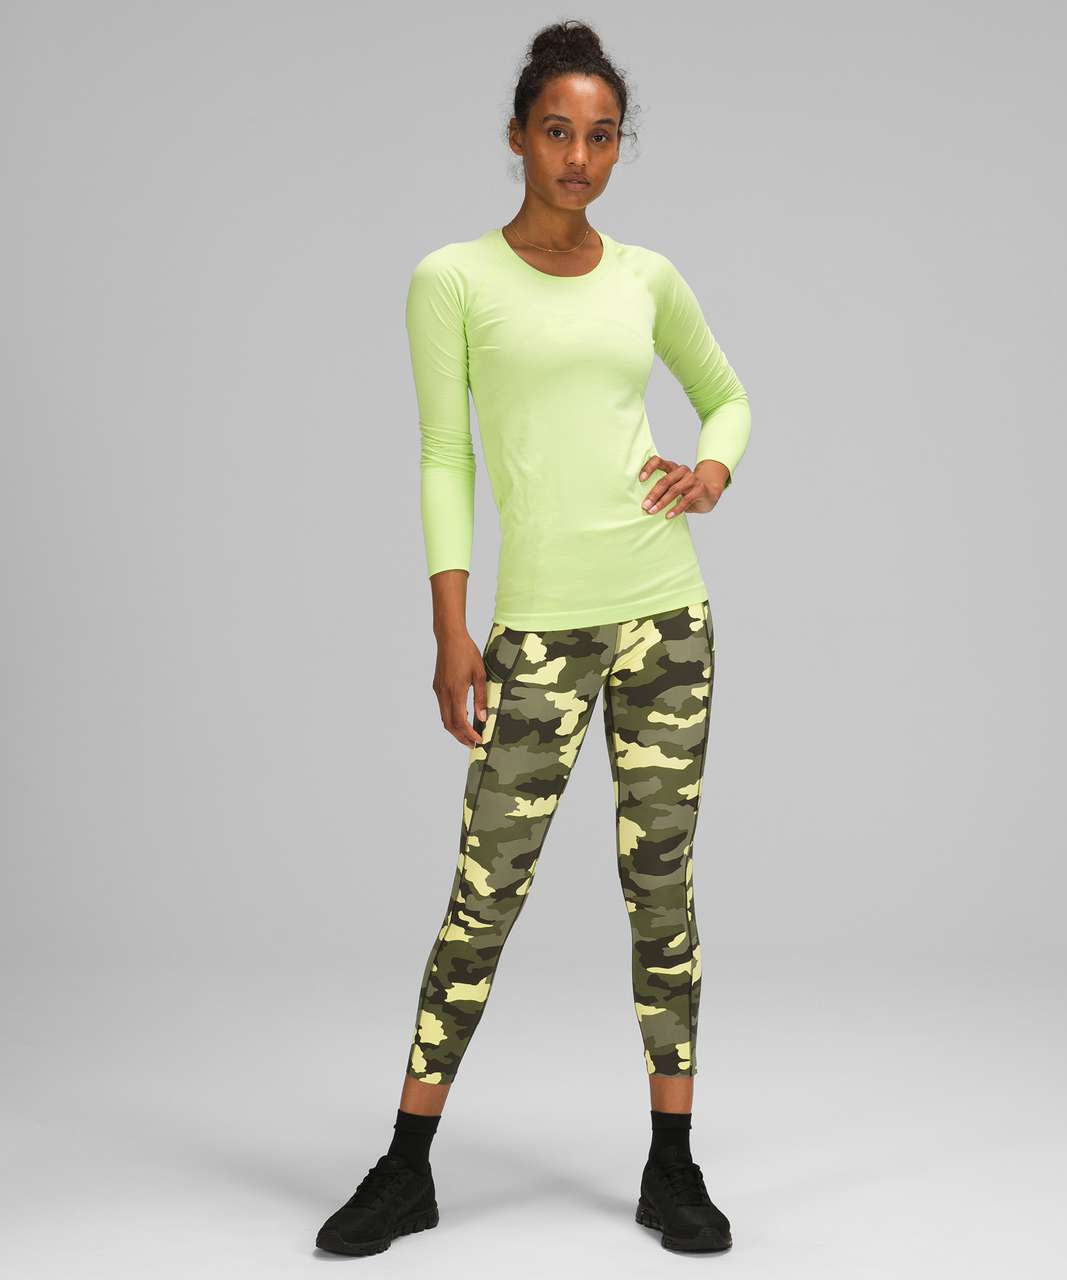 Lululemon Fast and Free High Rise Crop 23" - Heritage 365 Camo Crispin Green Multi